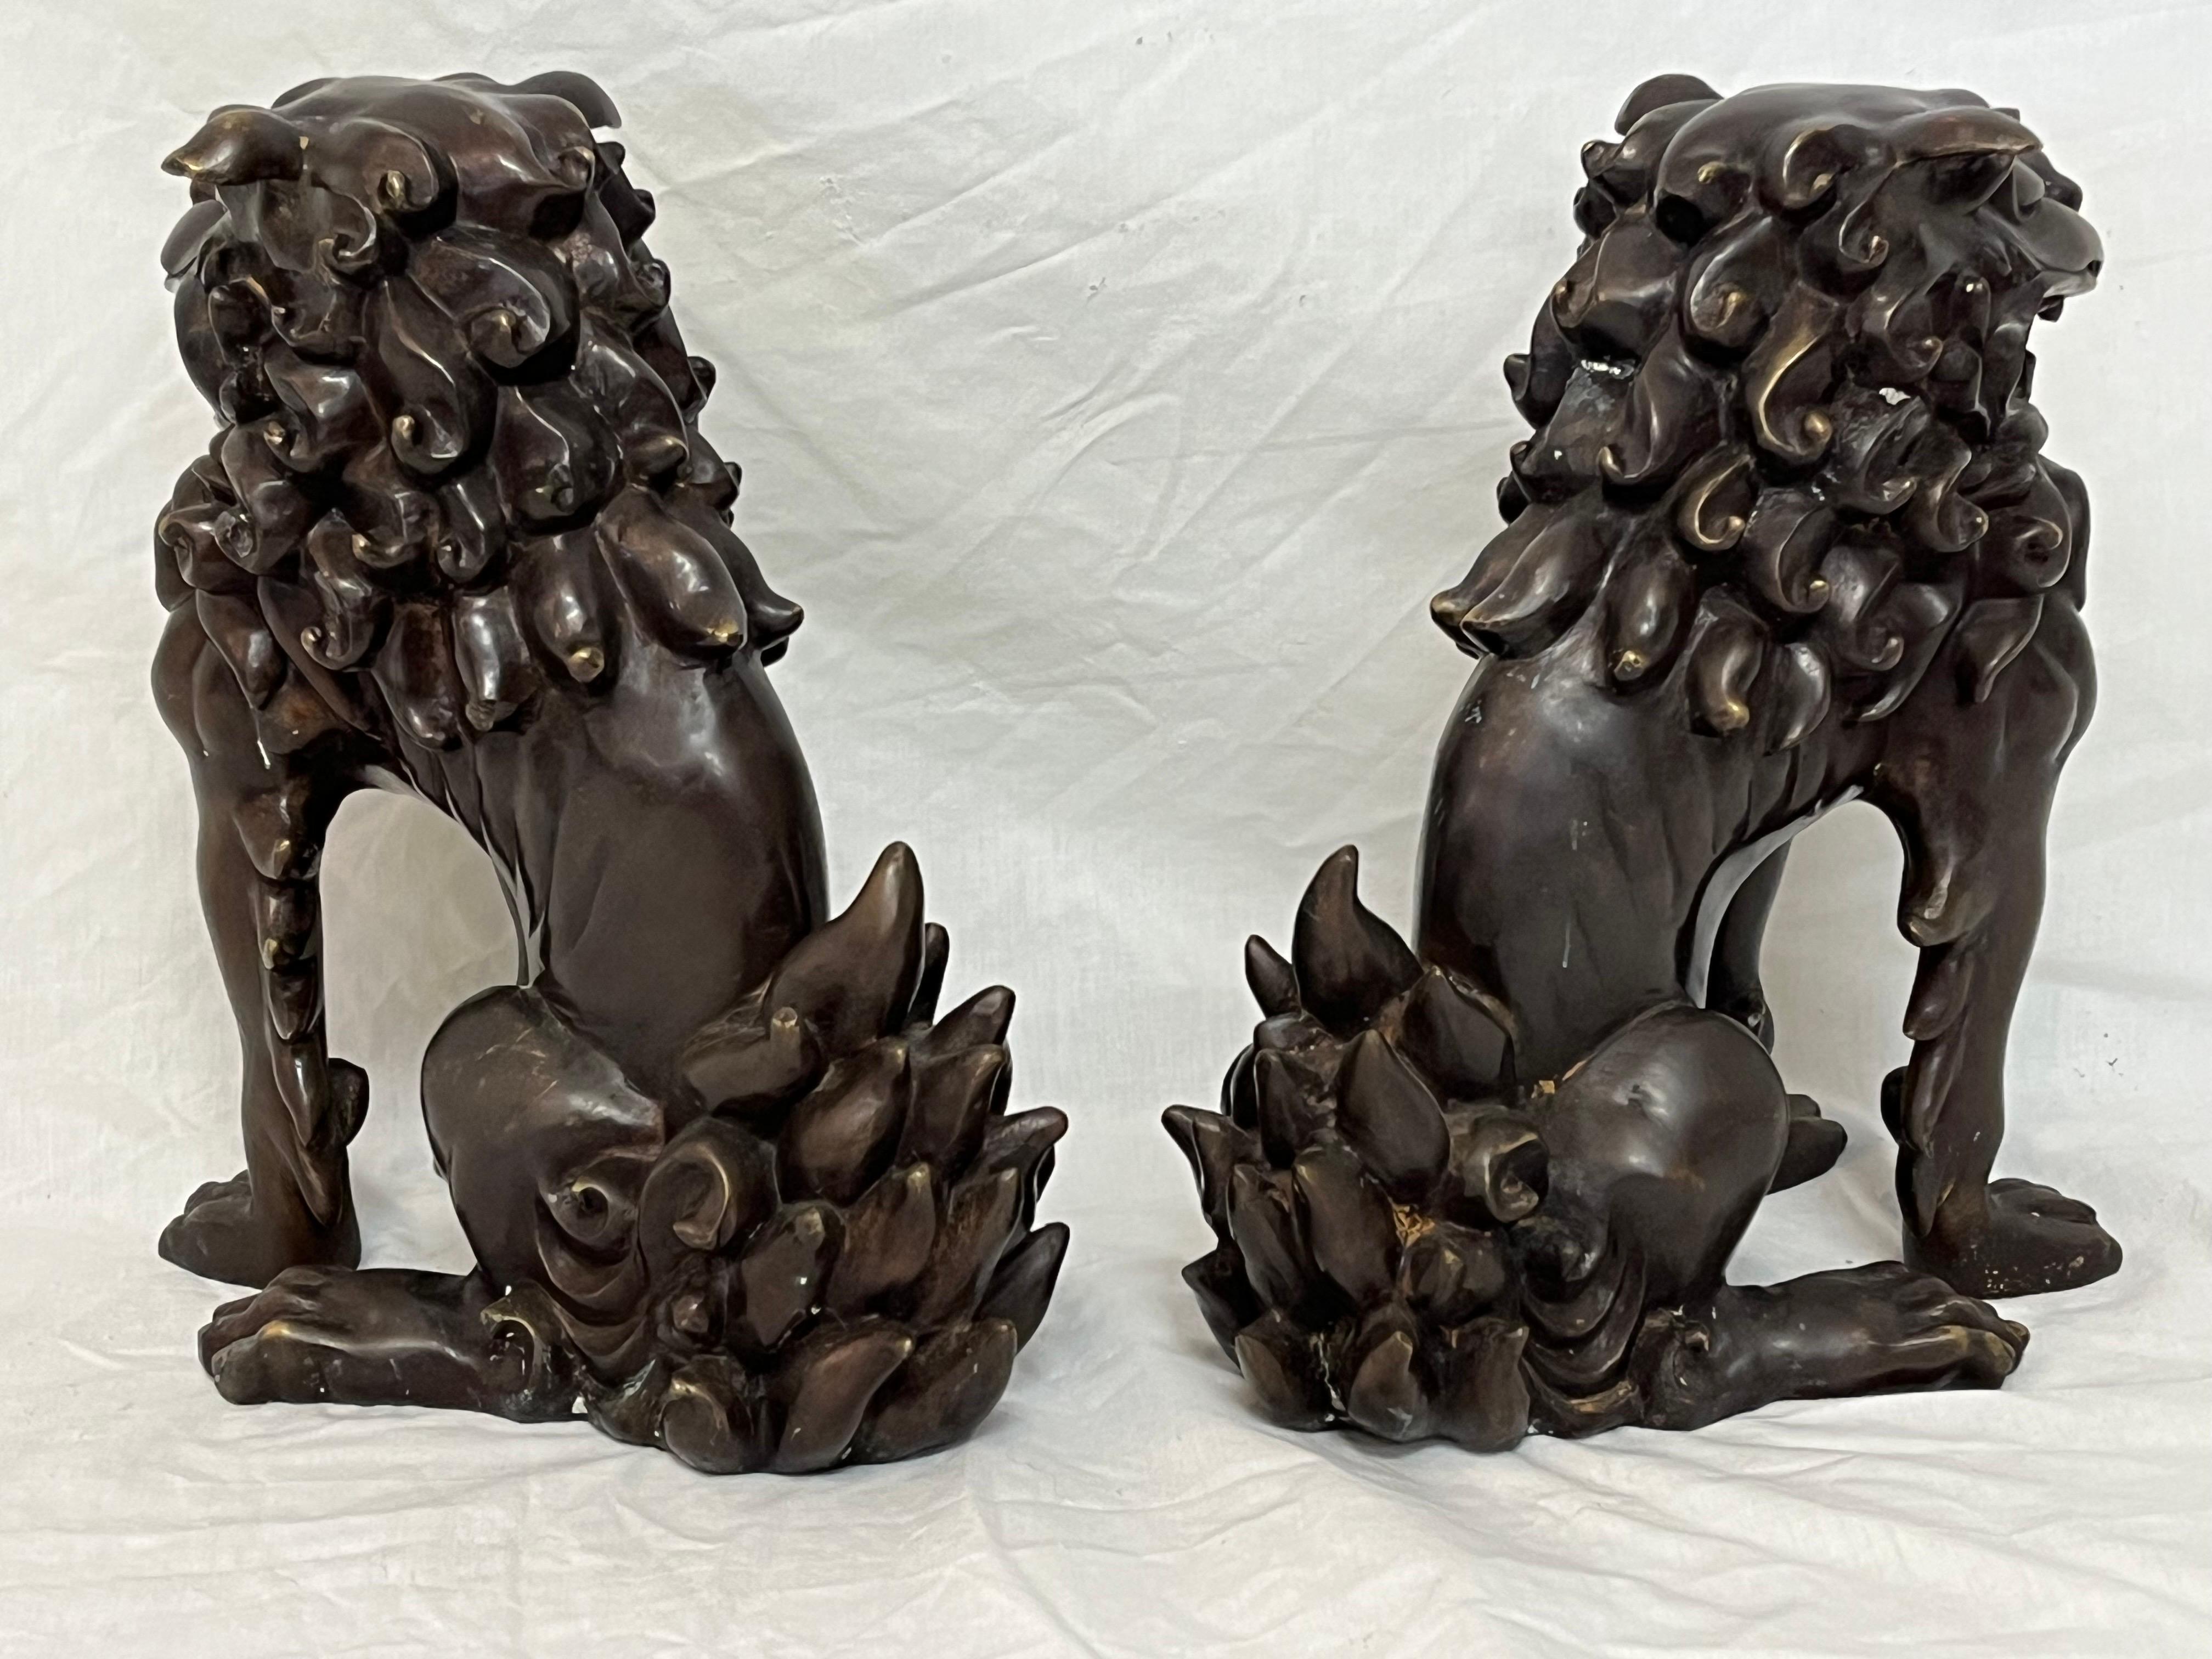 Large Pair of Bronze Lionized Shih Tzus Foo Dogs 20th Century Asian Sculptures For Sale 2